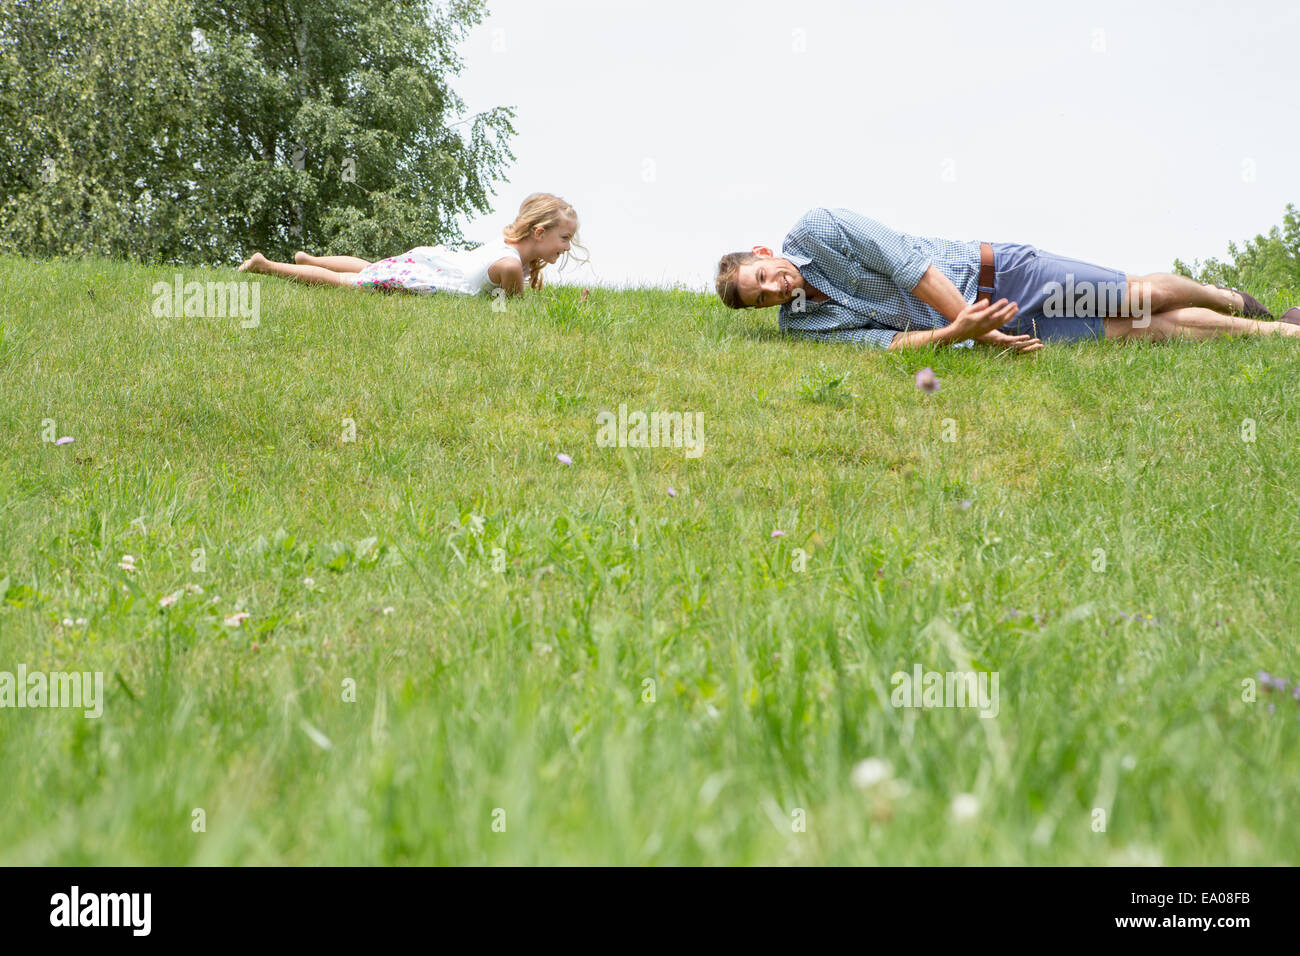 Rolling Down a Hill – Image Nation 2016